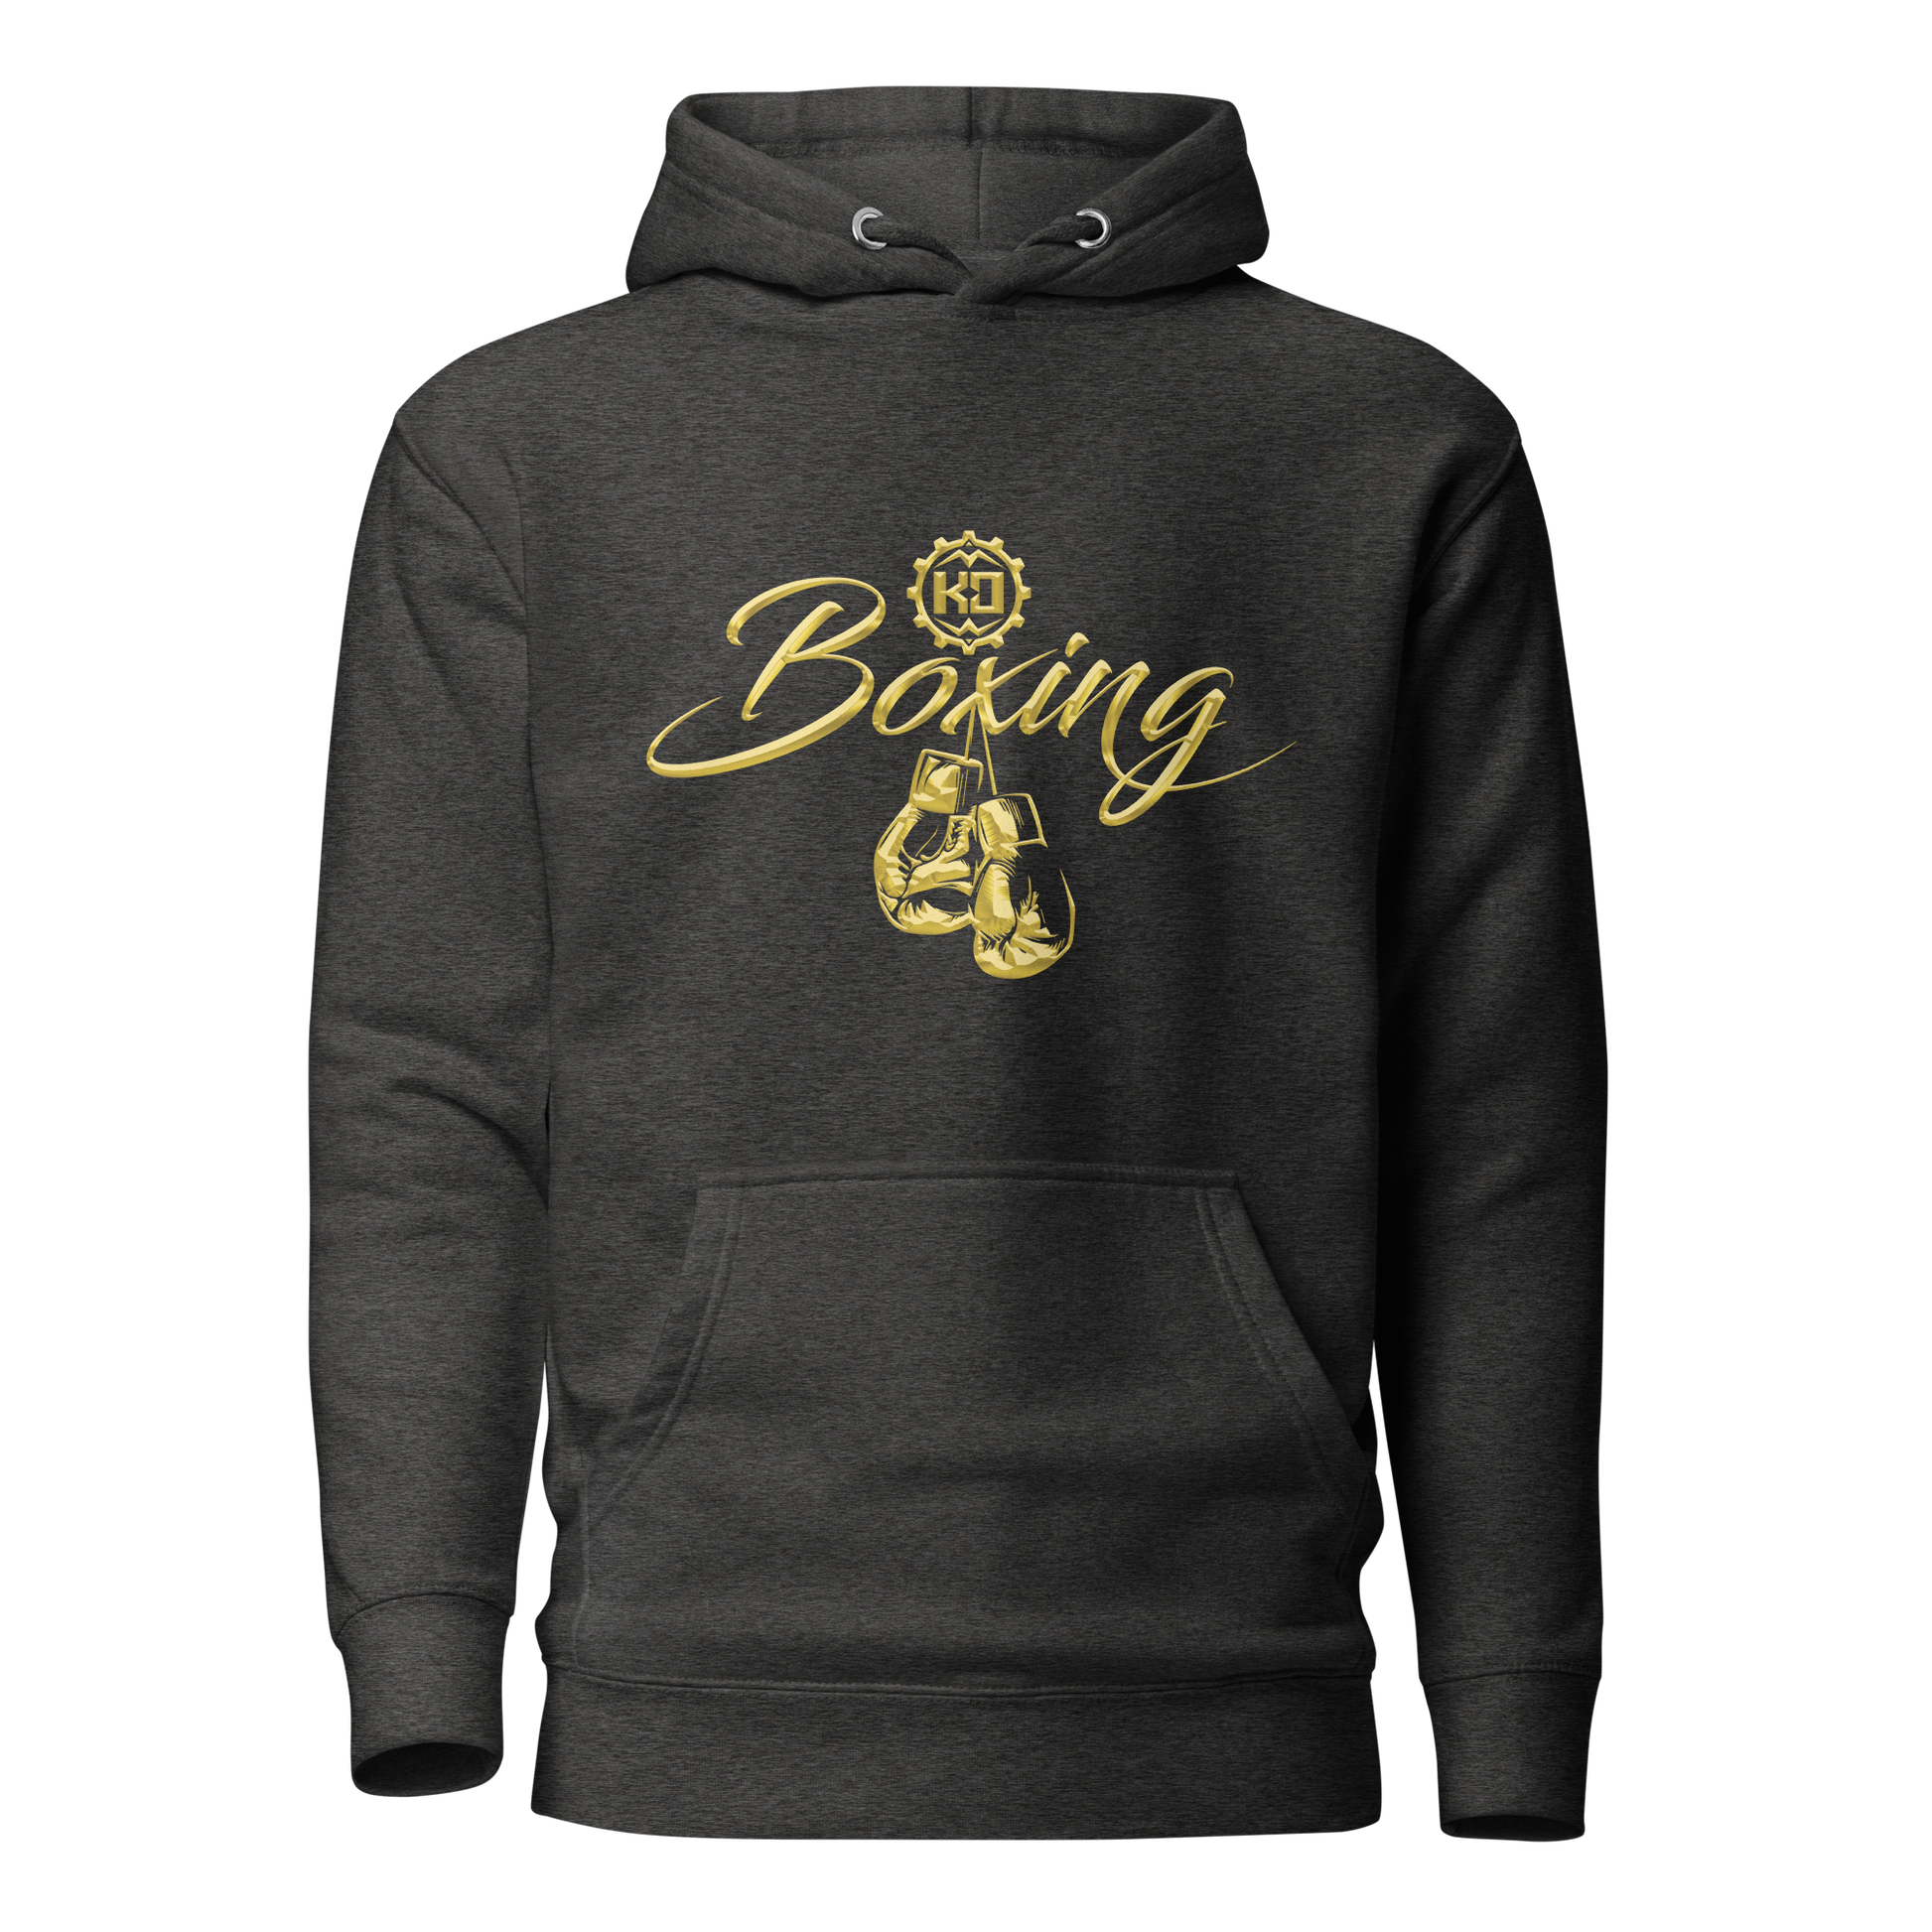 Cotton Hoodie Ko Machine Boxing Fight Club charcoal front